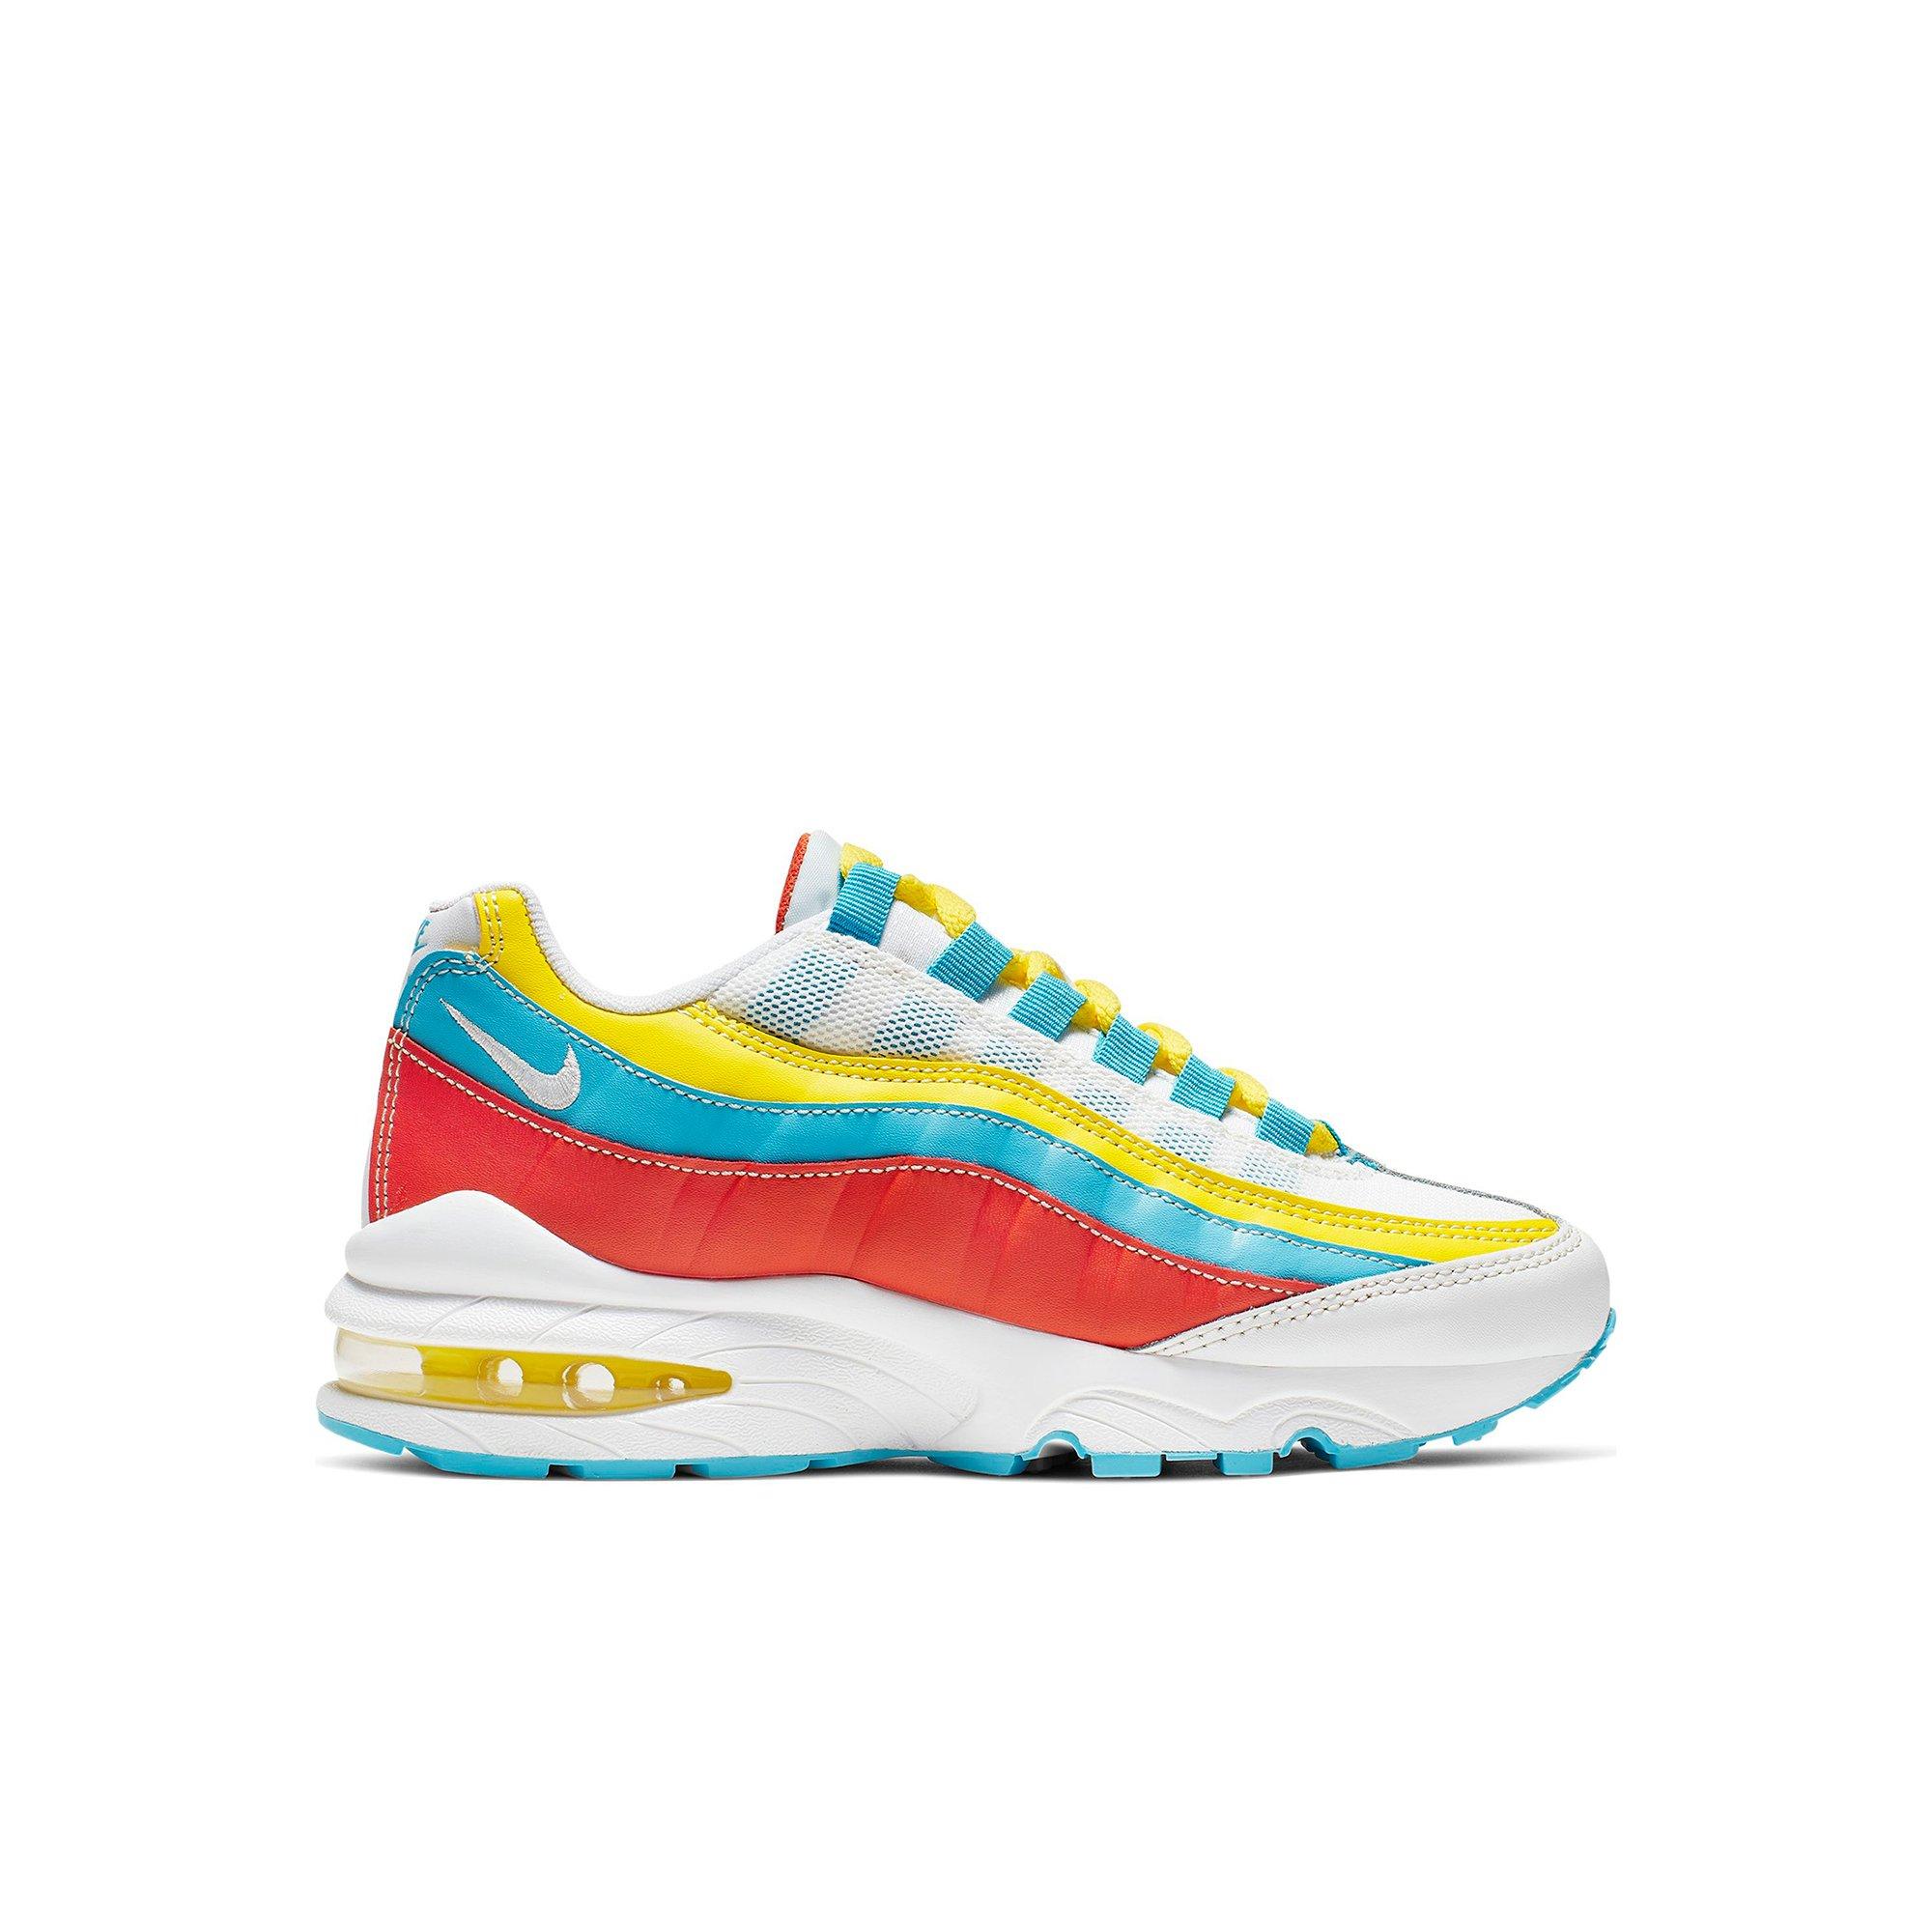 air max 95 blue and yellow